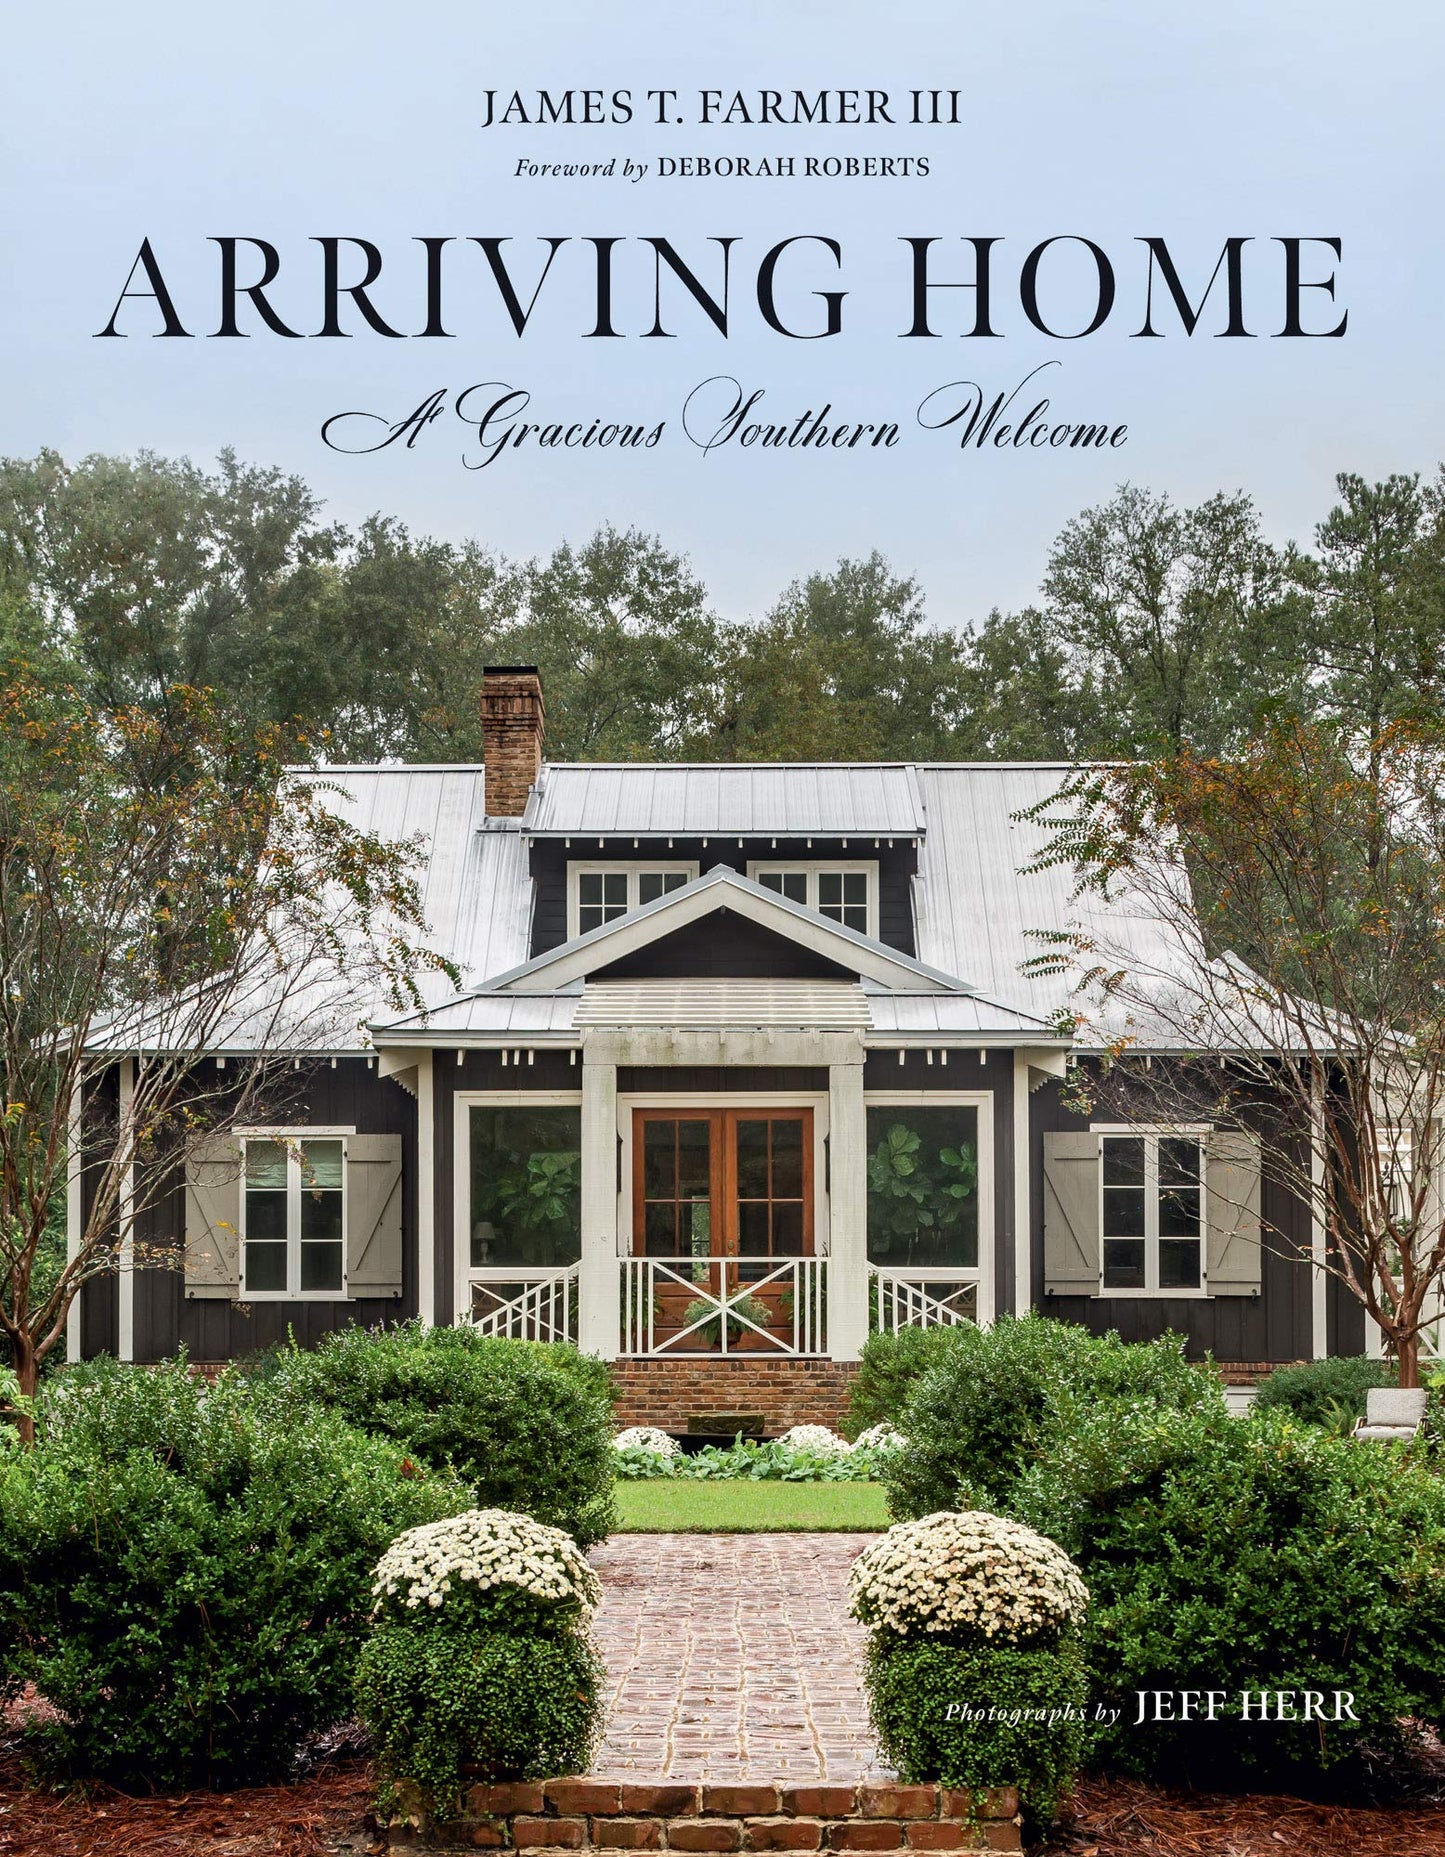 Arriving Home - A Gracious Southern Welcome - James Farmer